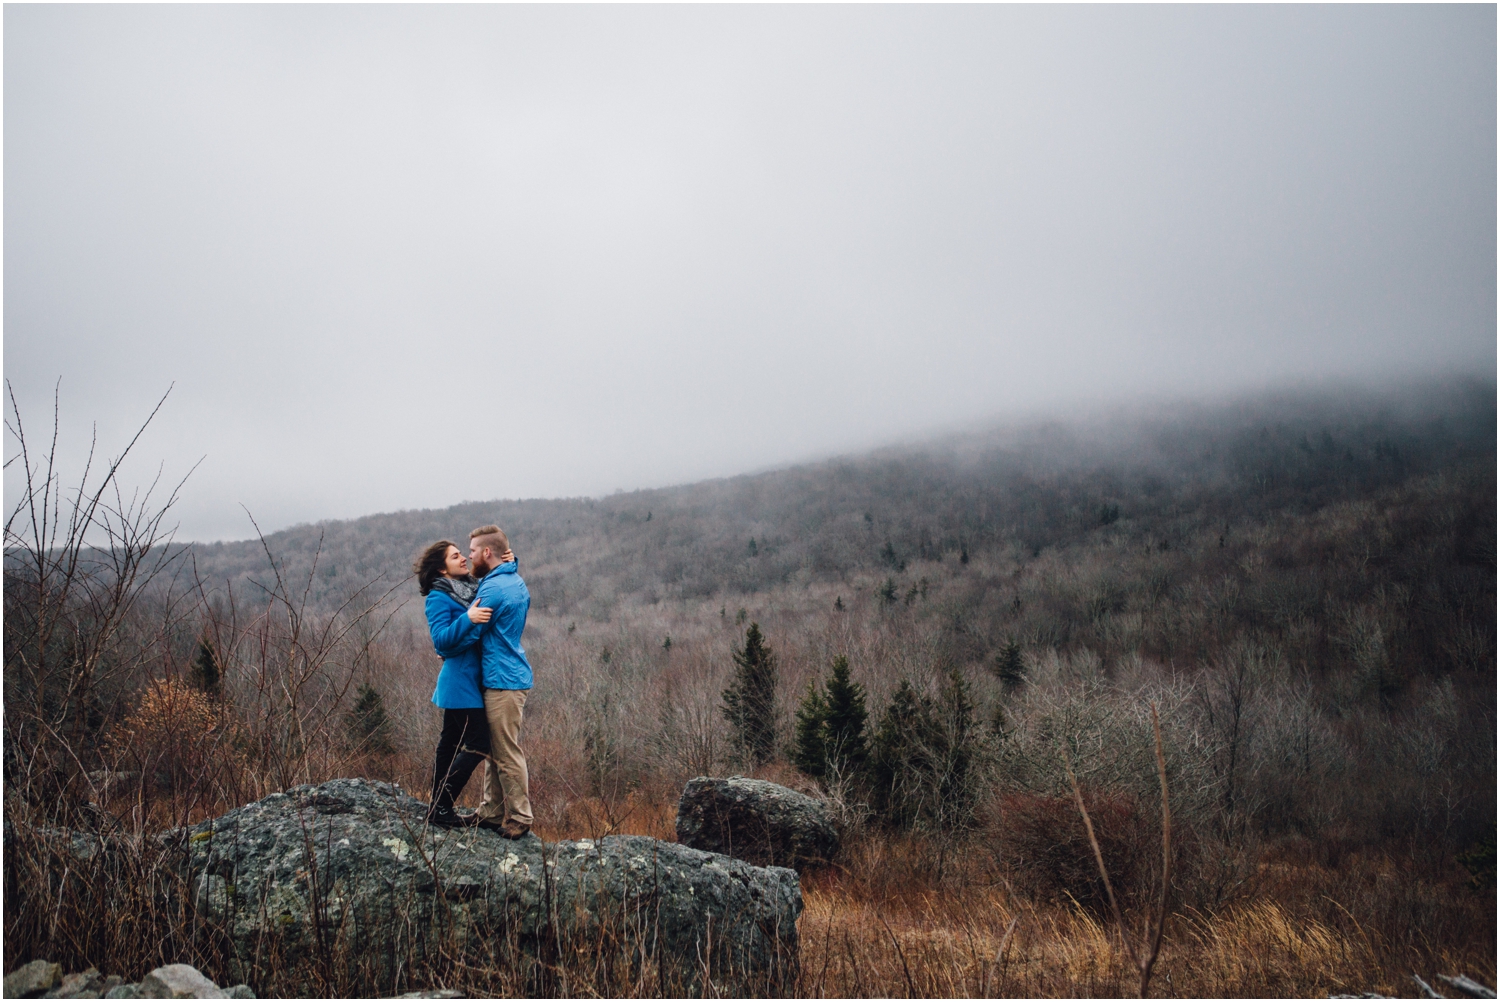 katy-sergent-photography-grayson-highlands-engagement-session-mouth-of-wilson-virginia-damascus-appalachian-trail-tennessee-wedding-elopement_0021.jpg